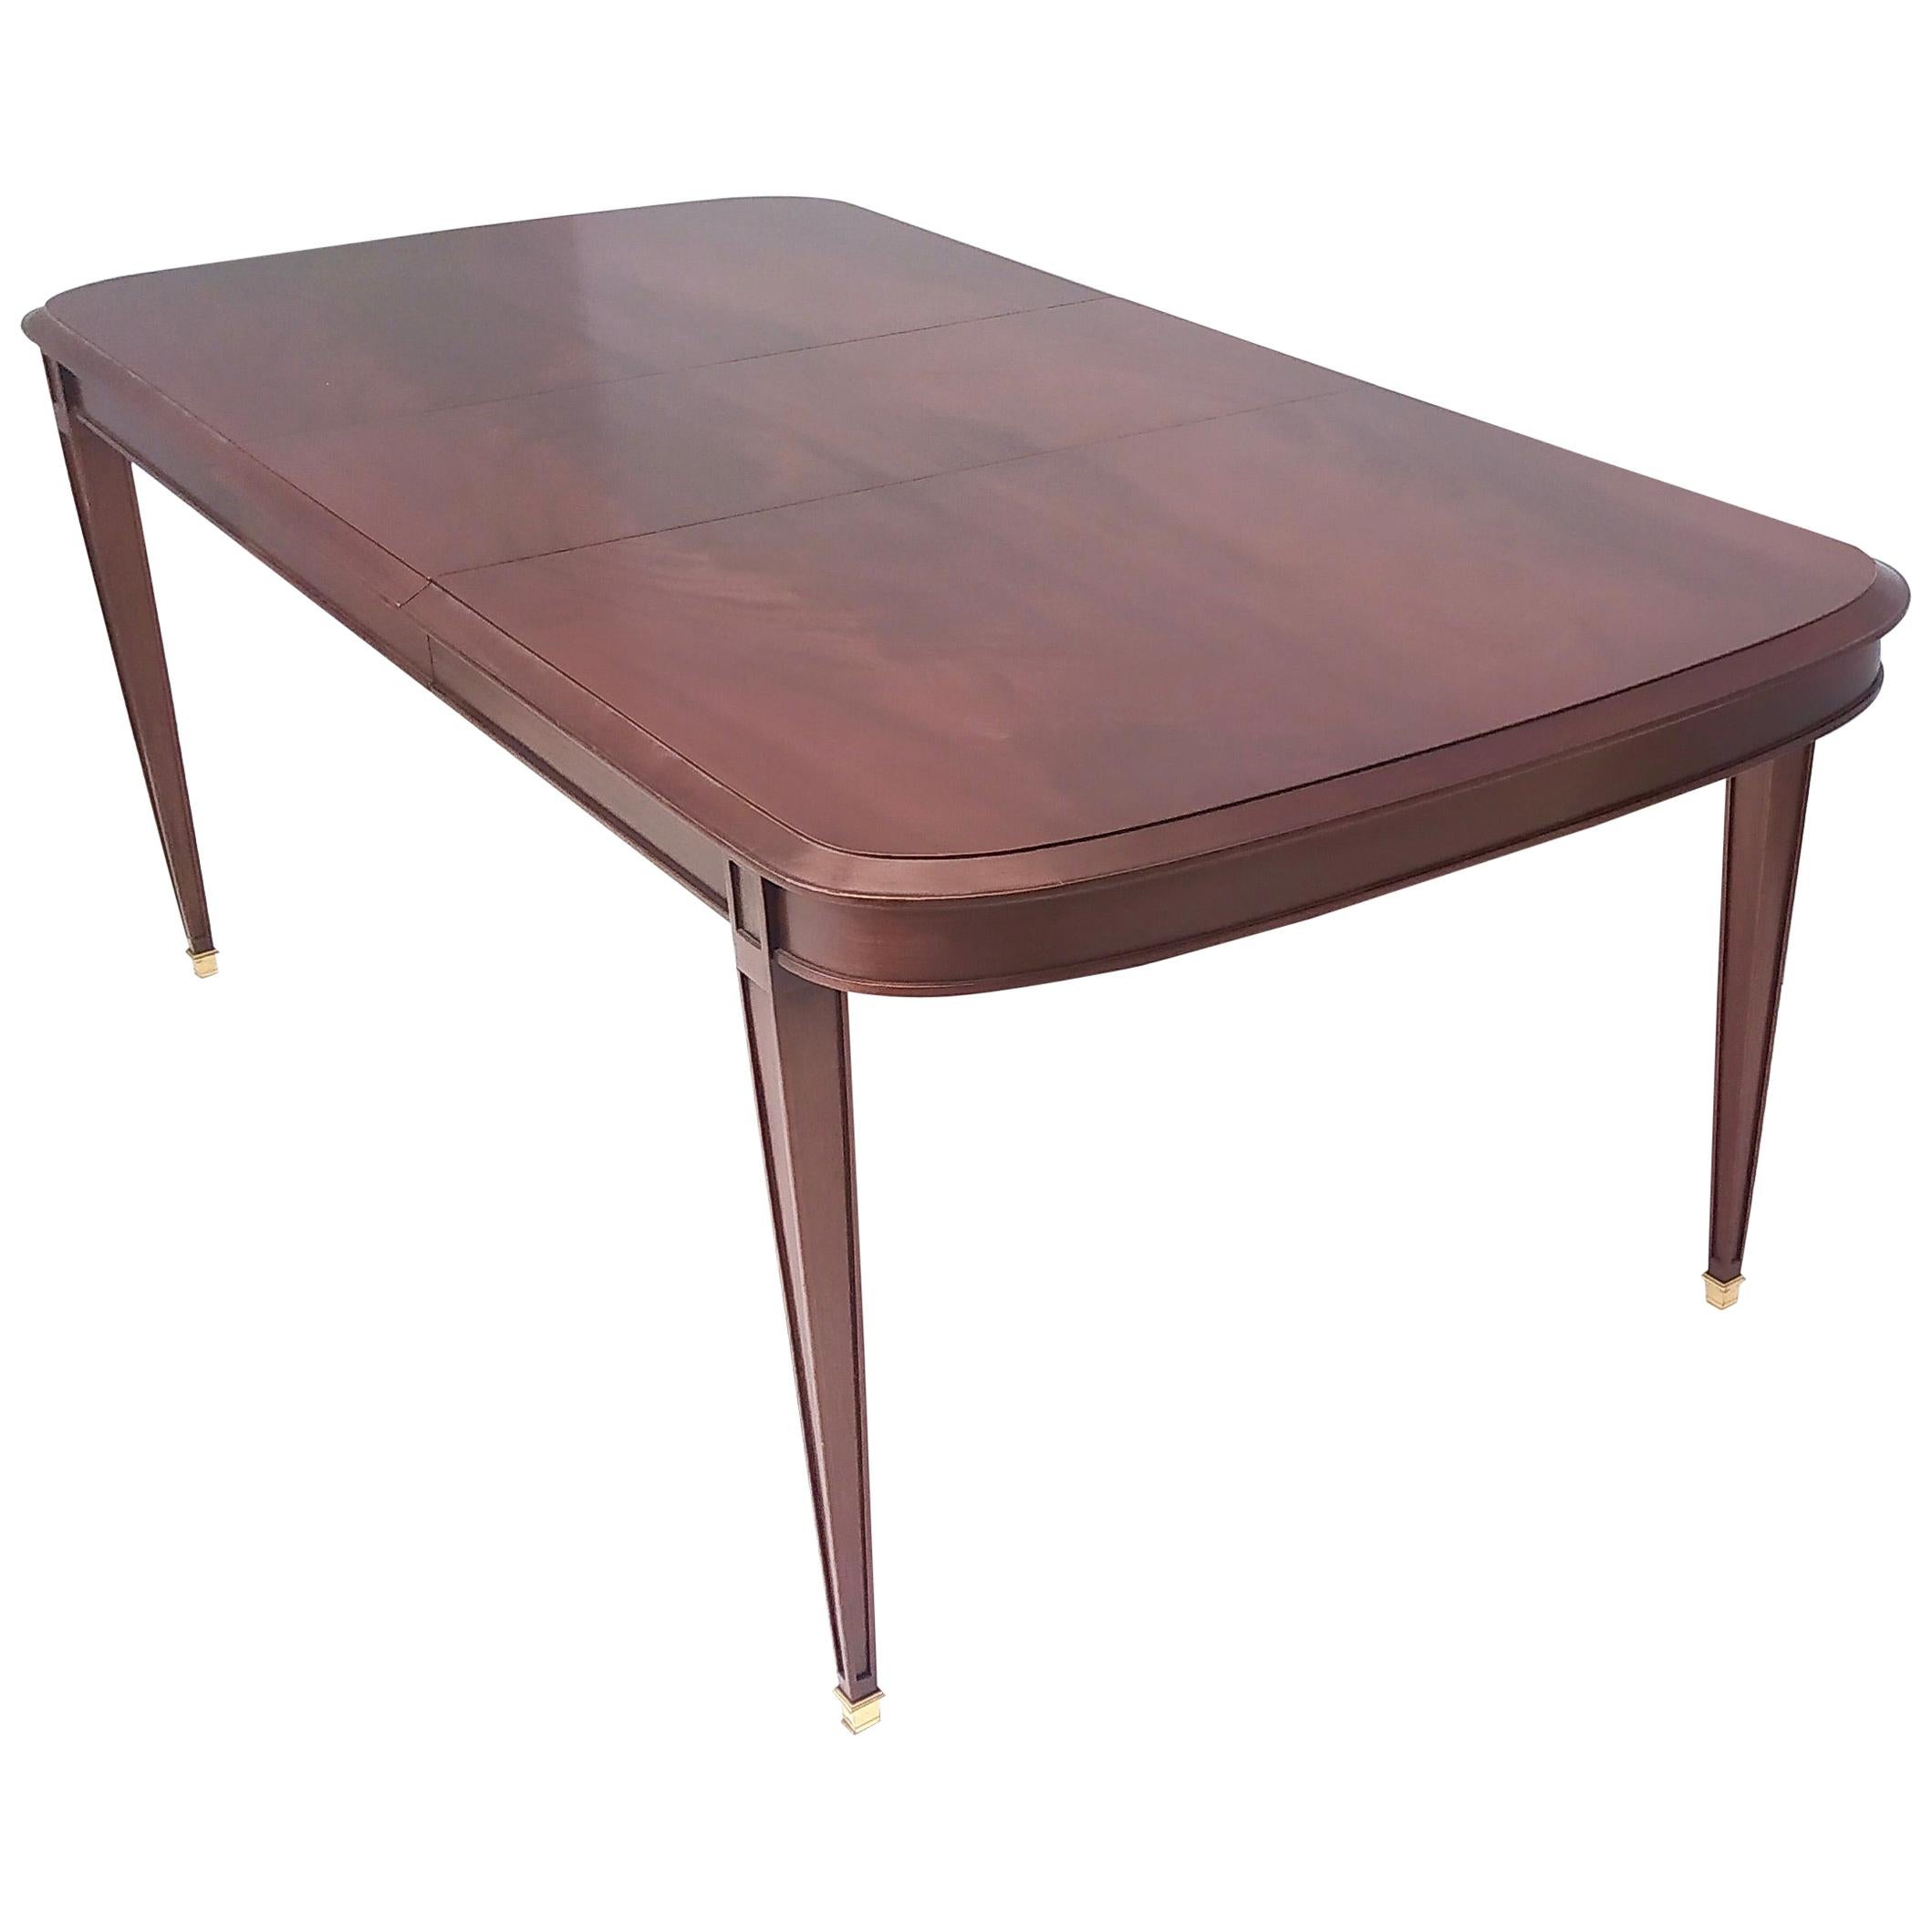 High-Quality Mahogany Extendible Dining Table Produced by Provasi, Italy, 1980s